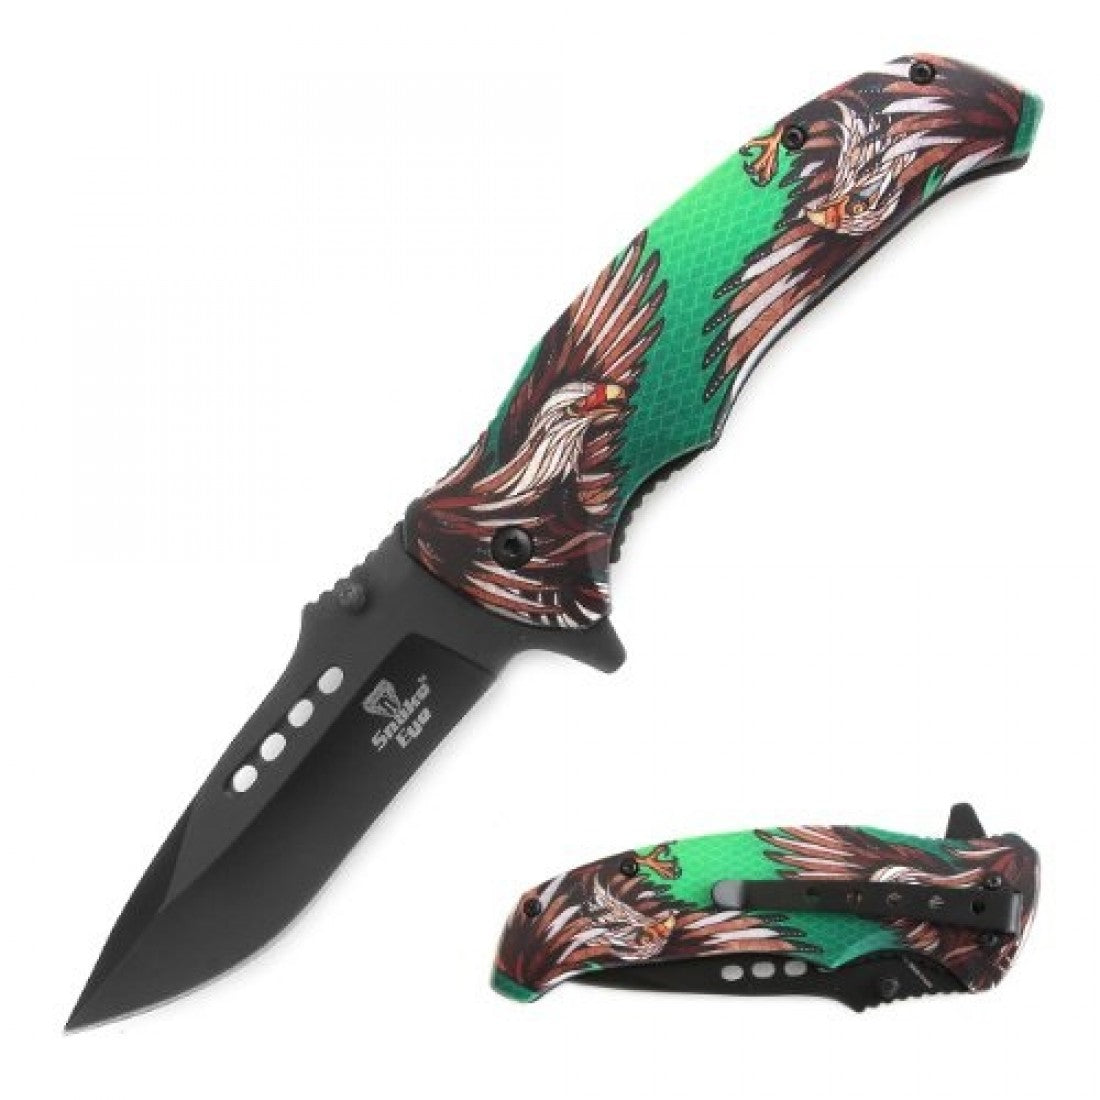 SE-5044 Tactical Spring Assist Knife Wild Life Collection 4.75" (120/cs) - MK Distro